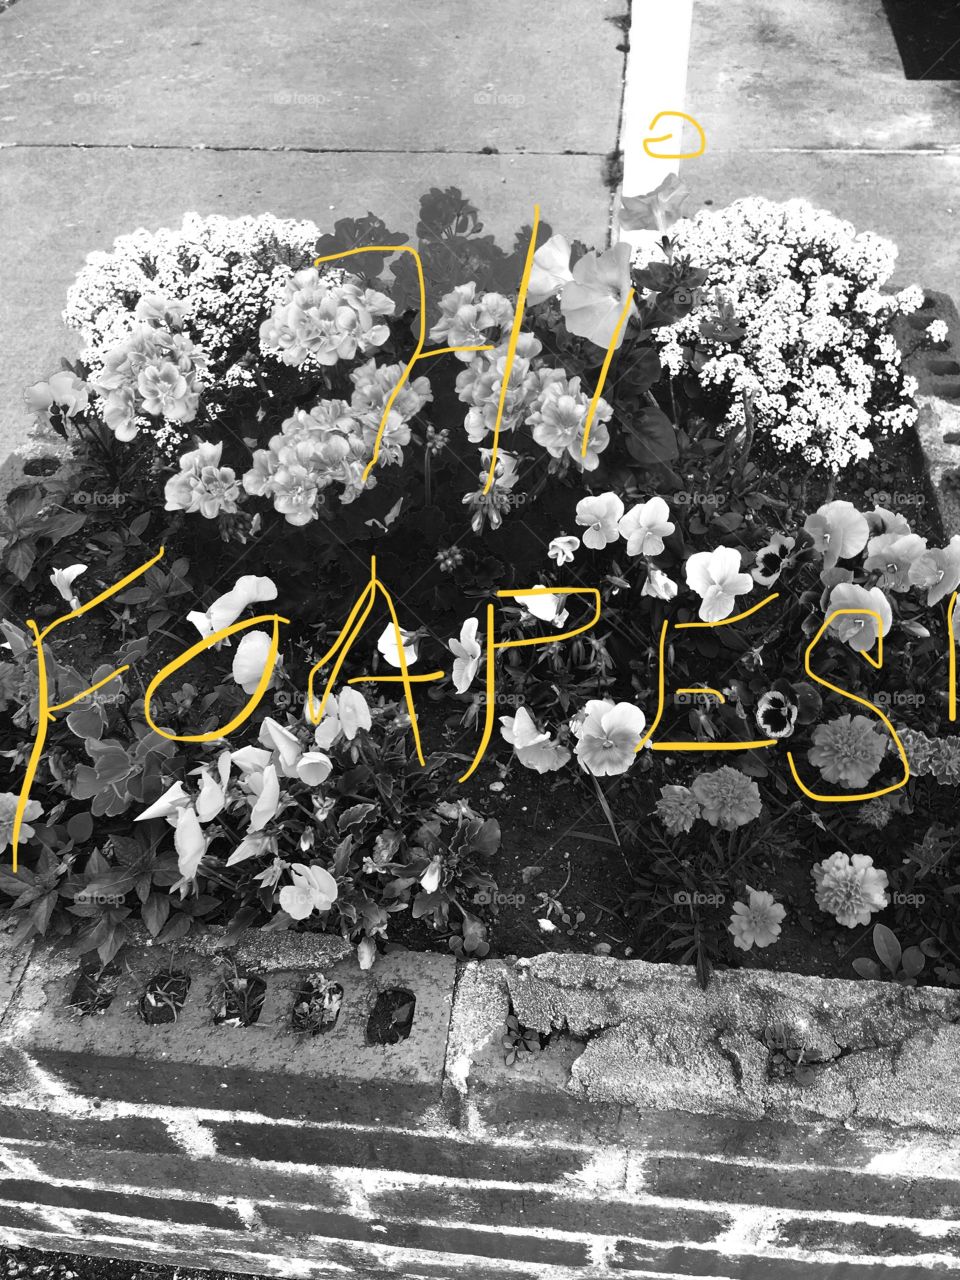 Managery of flowers outside done in black and white with a caption on the picture.